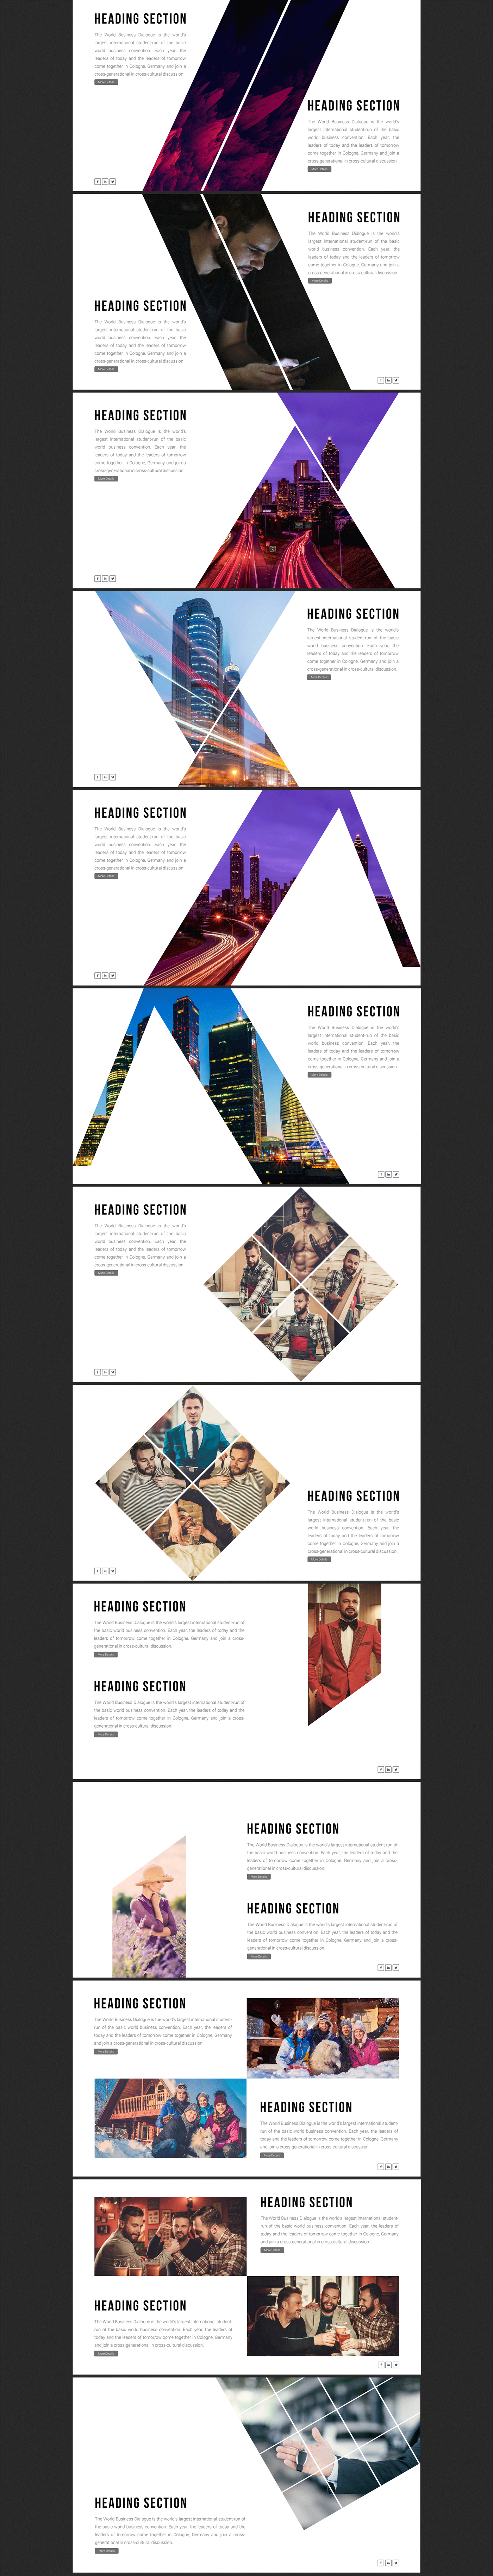 reflect Powerpoint Presentatin free Free Template free download minimal modern TREND DESIGN top sell item